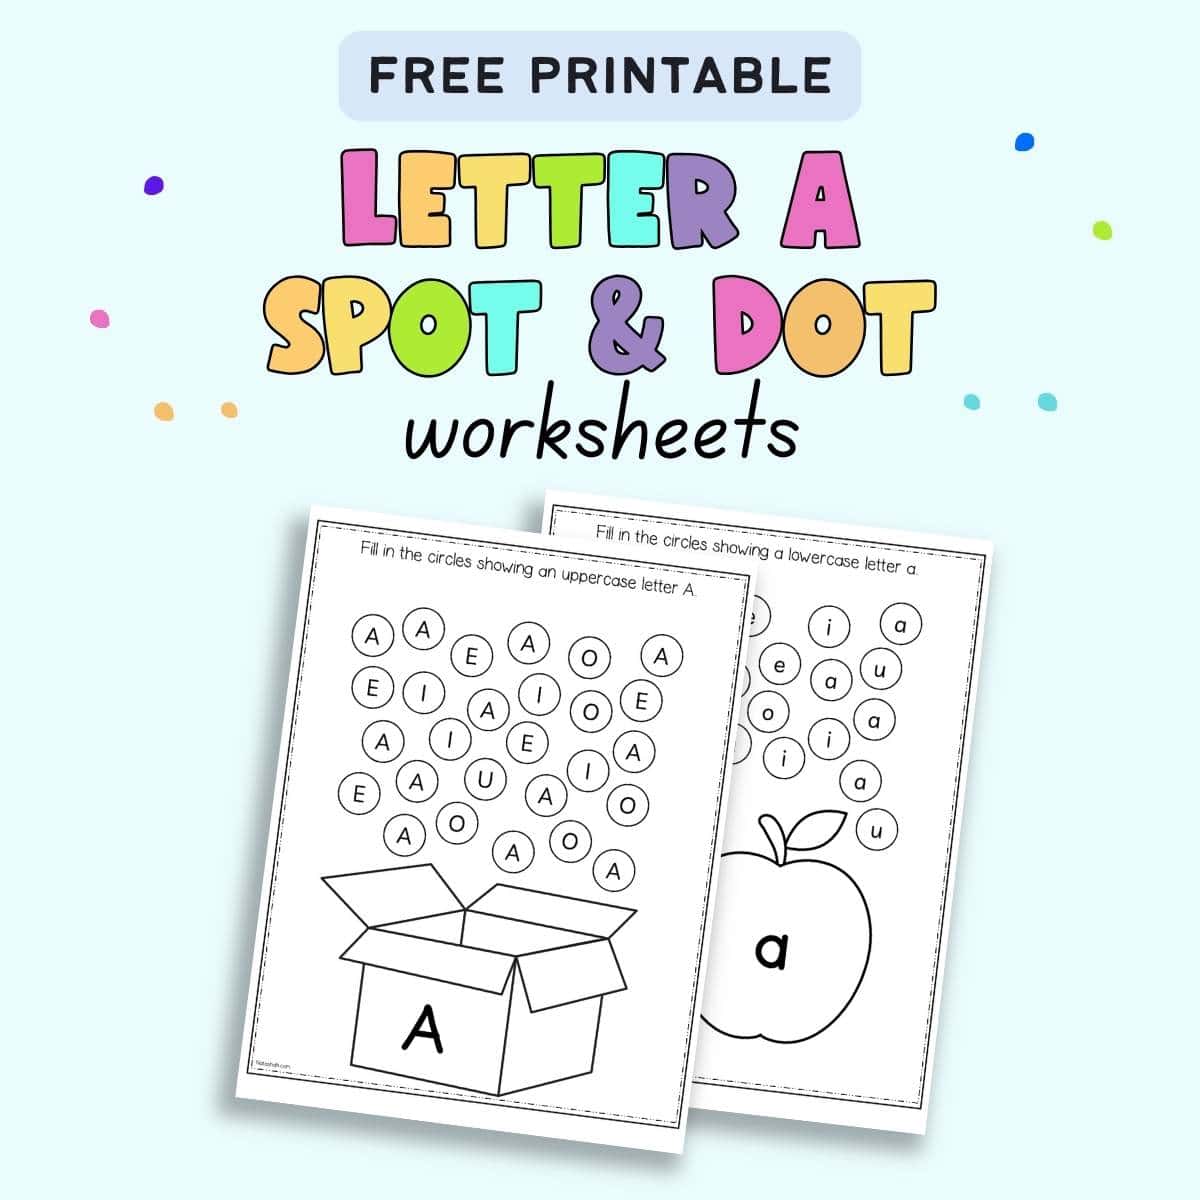 A preview of two pages of spot and dot page with letters A and a